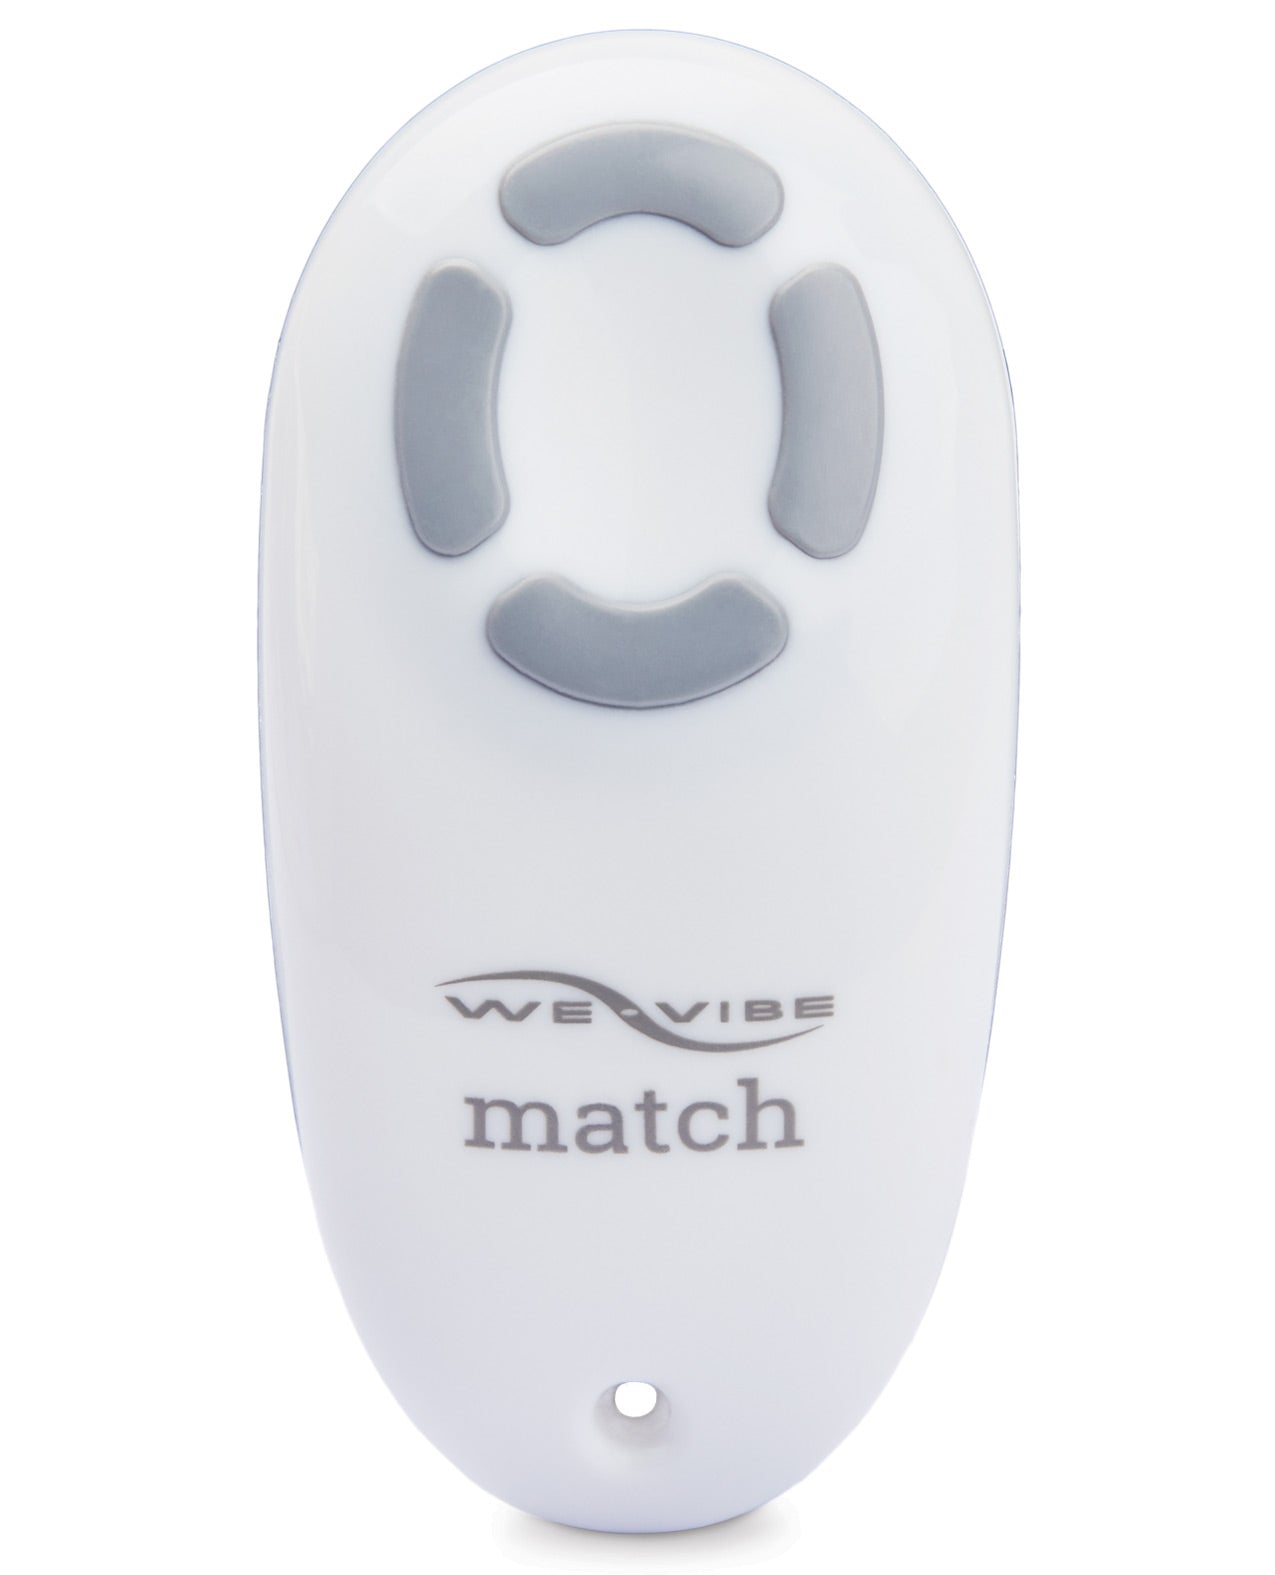 We-Vibe Match Replacement Remote